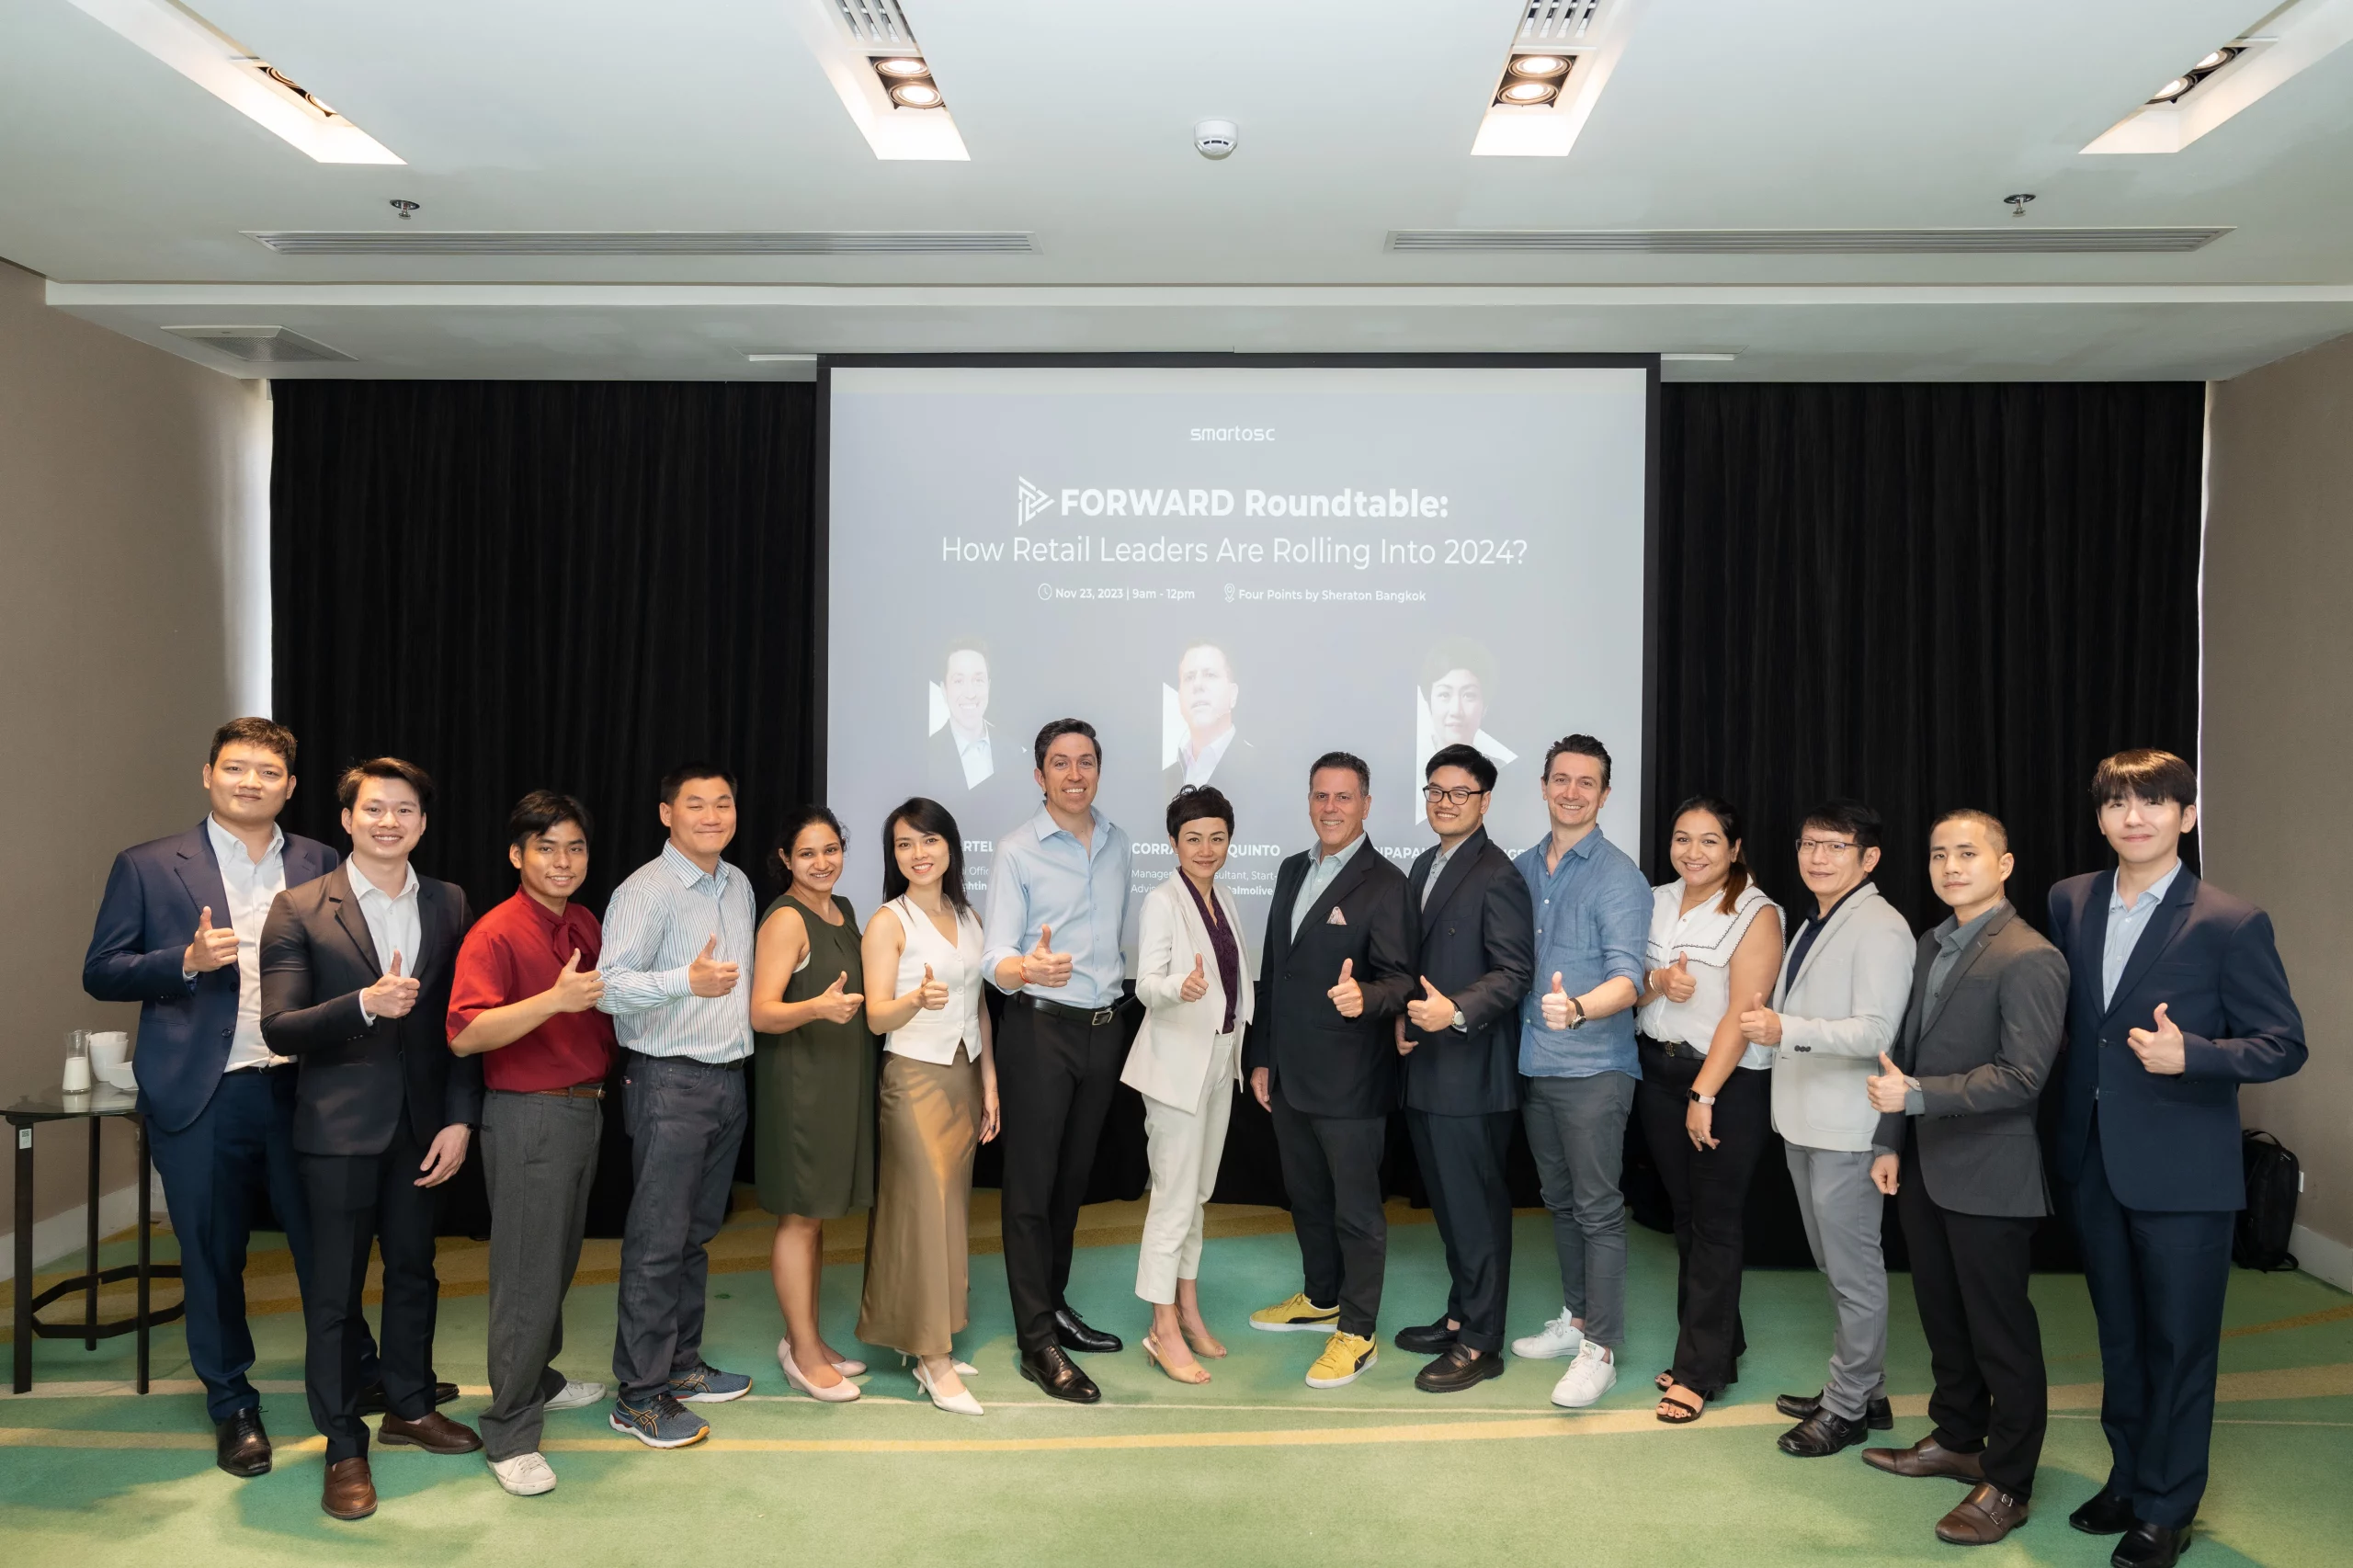 SmartOSC's Forward Roundtable Sets The Tone For Thailand's Retail Leaders In 2024